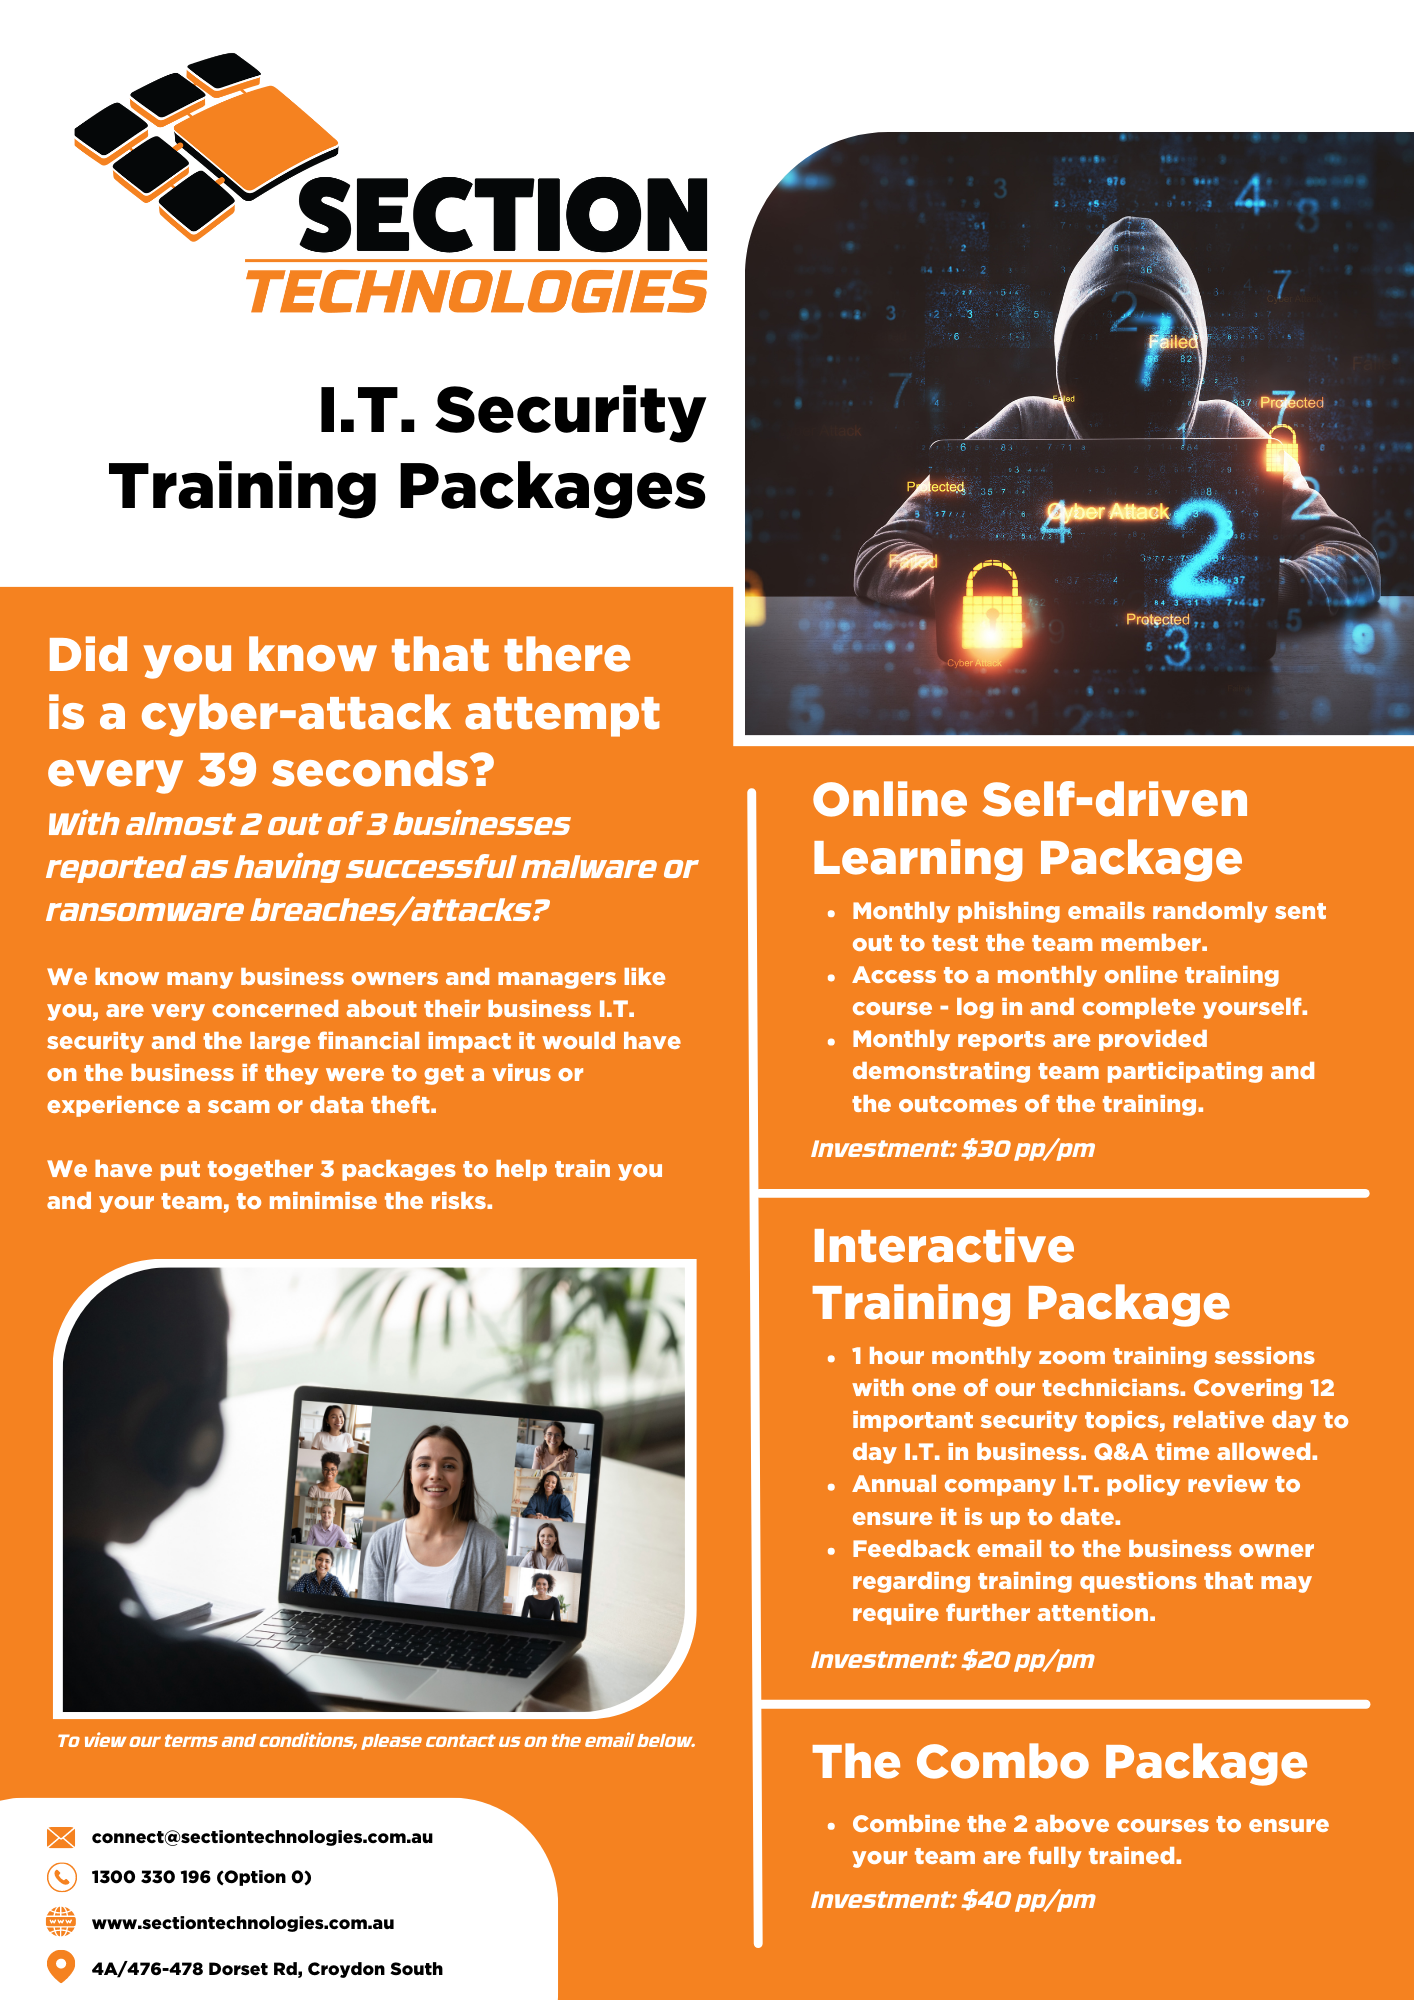 Details about the IT security packages available at Section Technologies